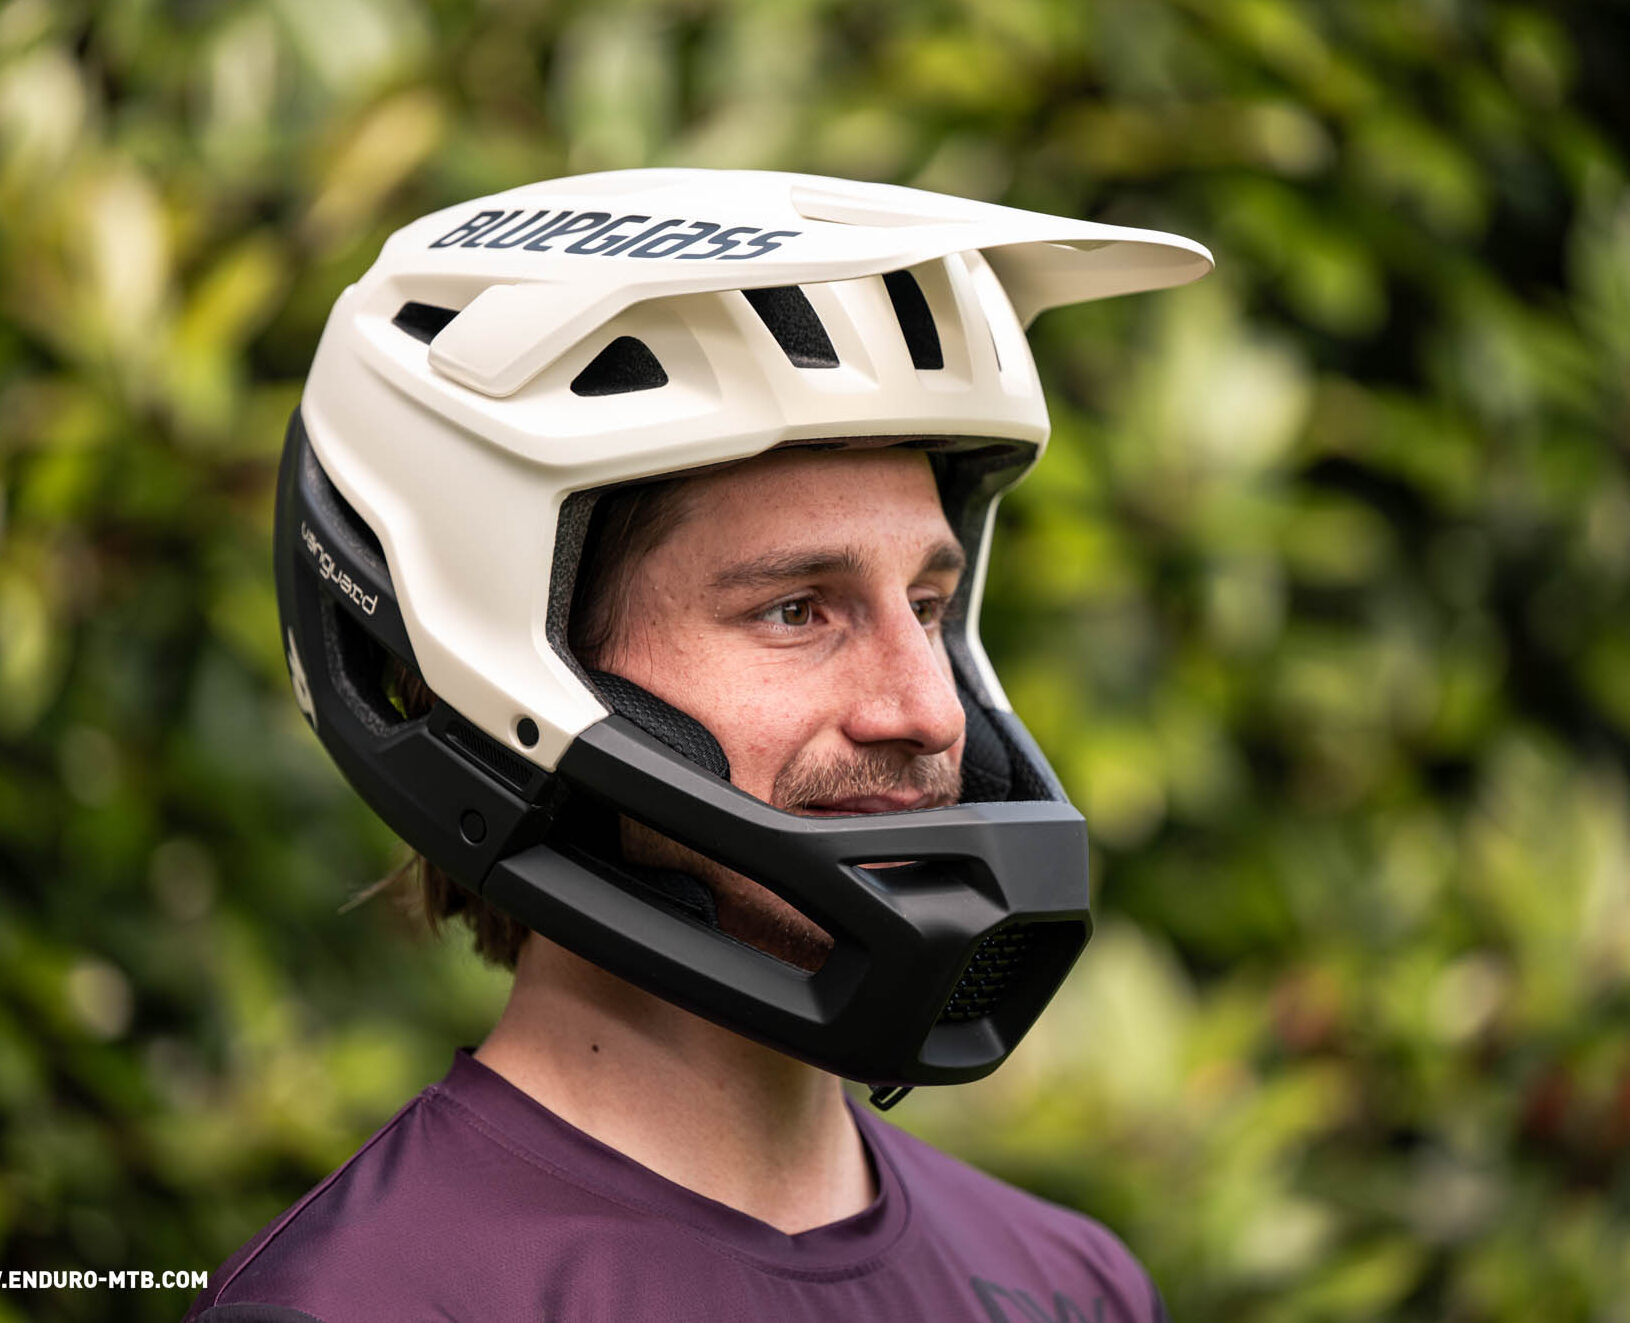 Bluegrass Vanguard Core Edition full face helmet in review – Real full face feeling with top ventilation?